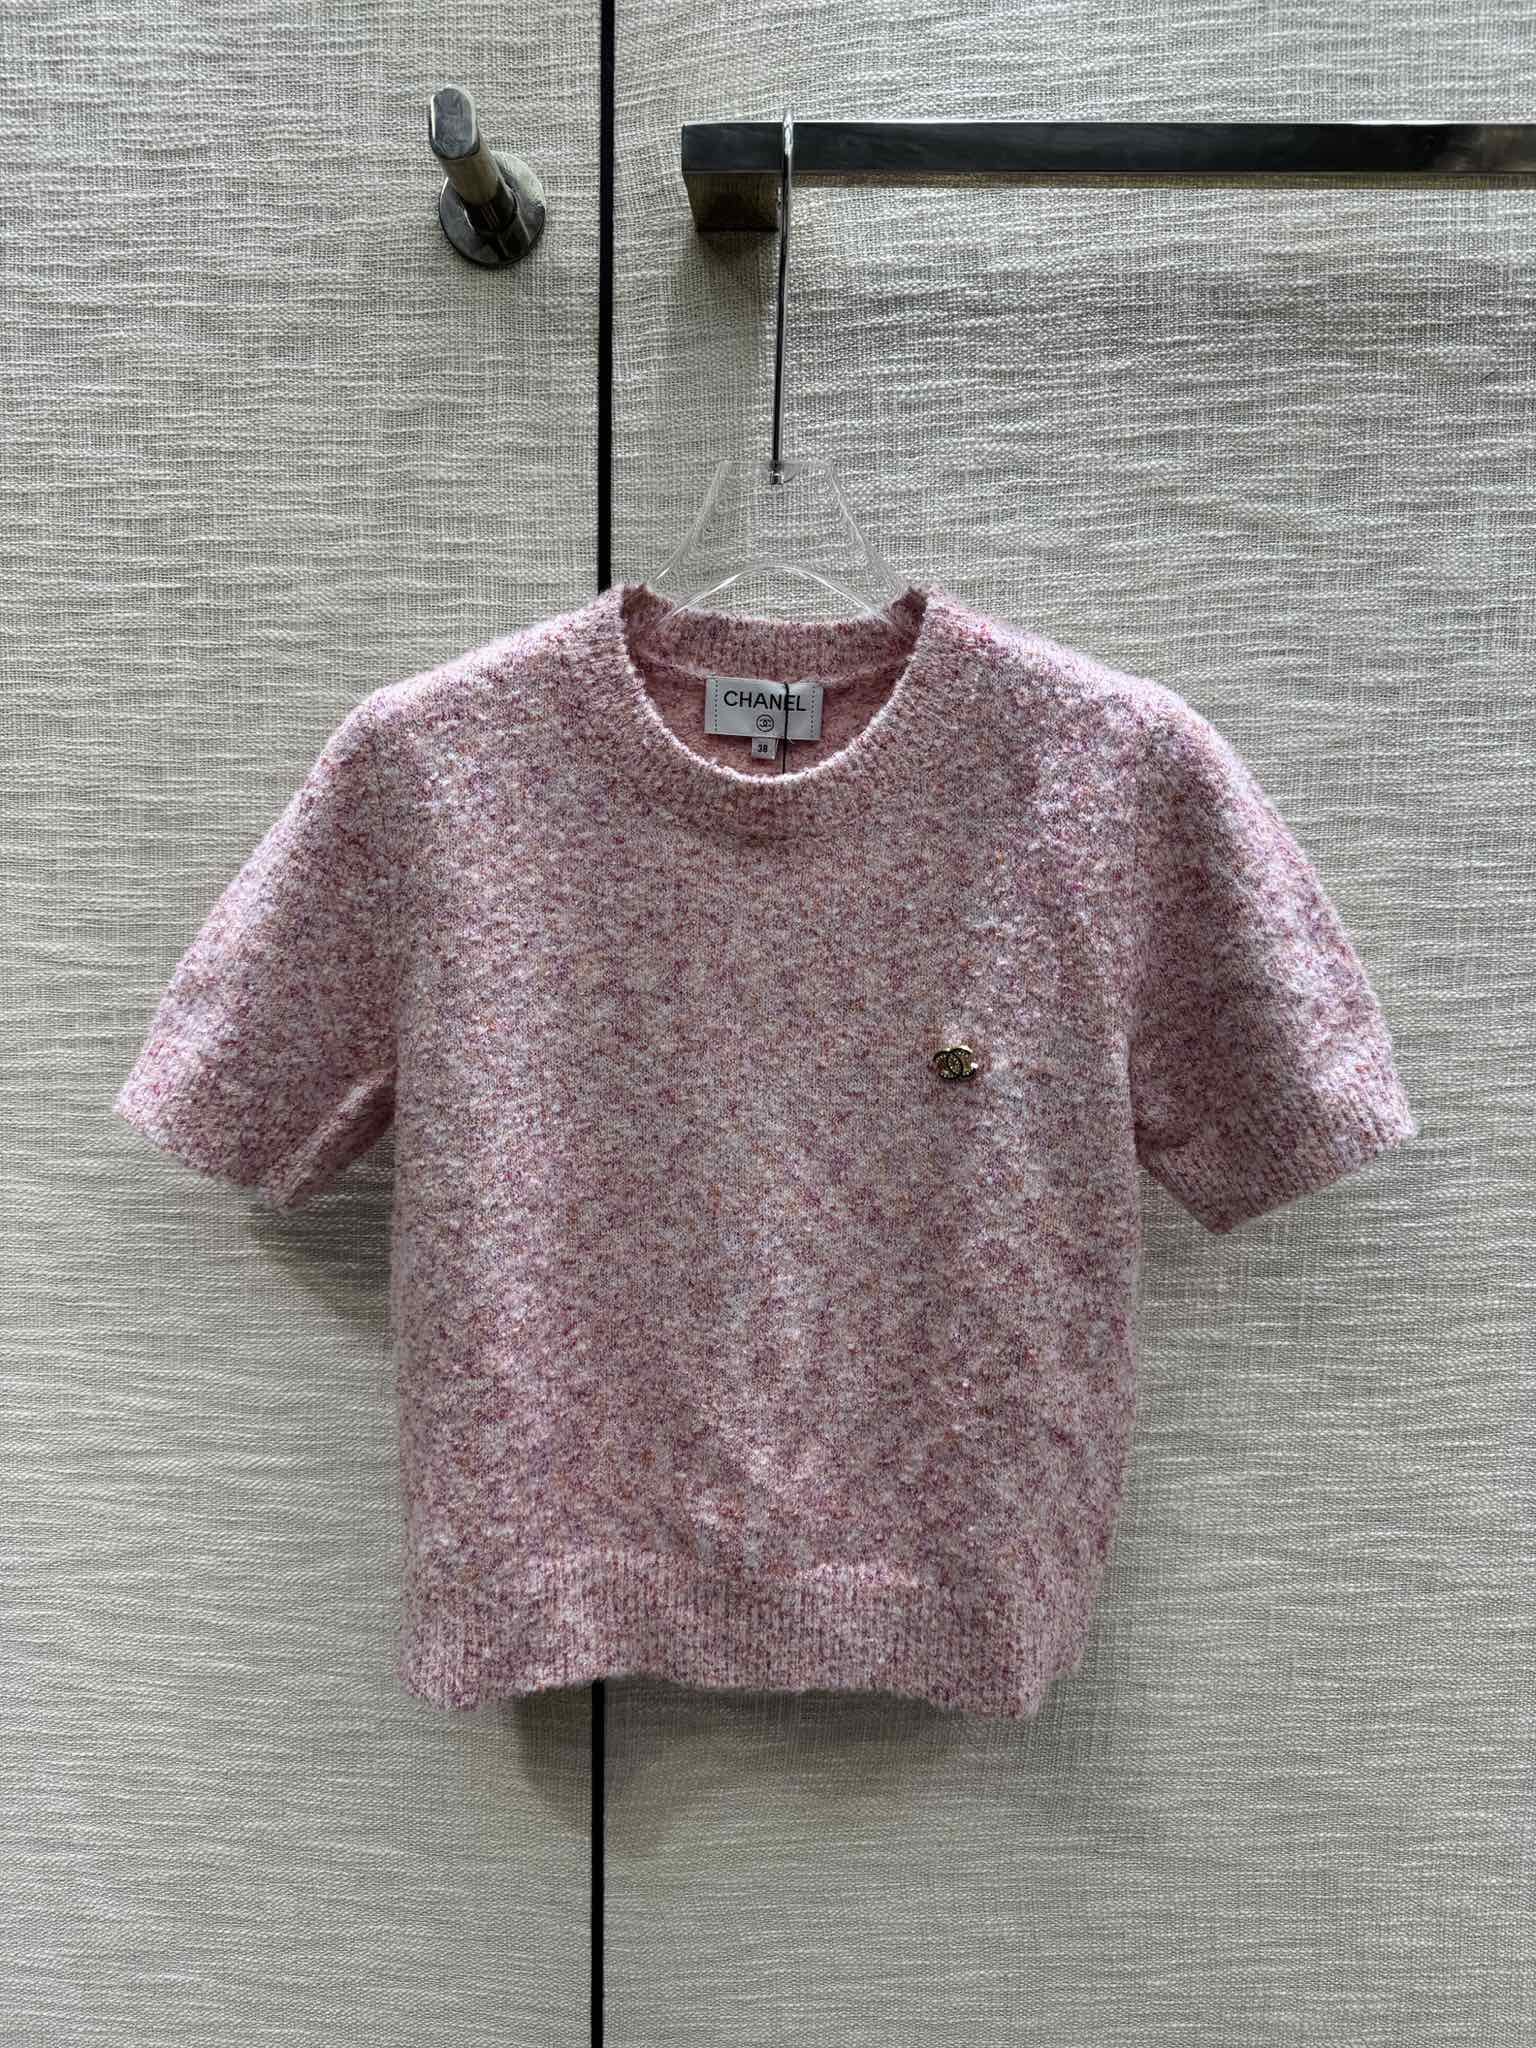 Chanel Clothing T-Shirt First Top
 Knitting Spring Collection Short Sleeve